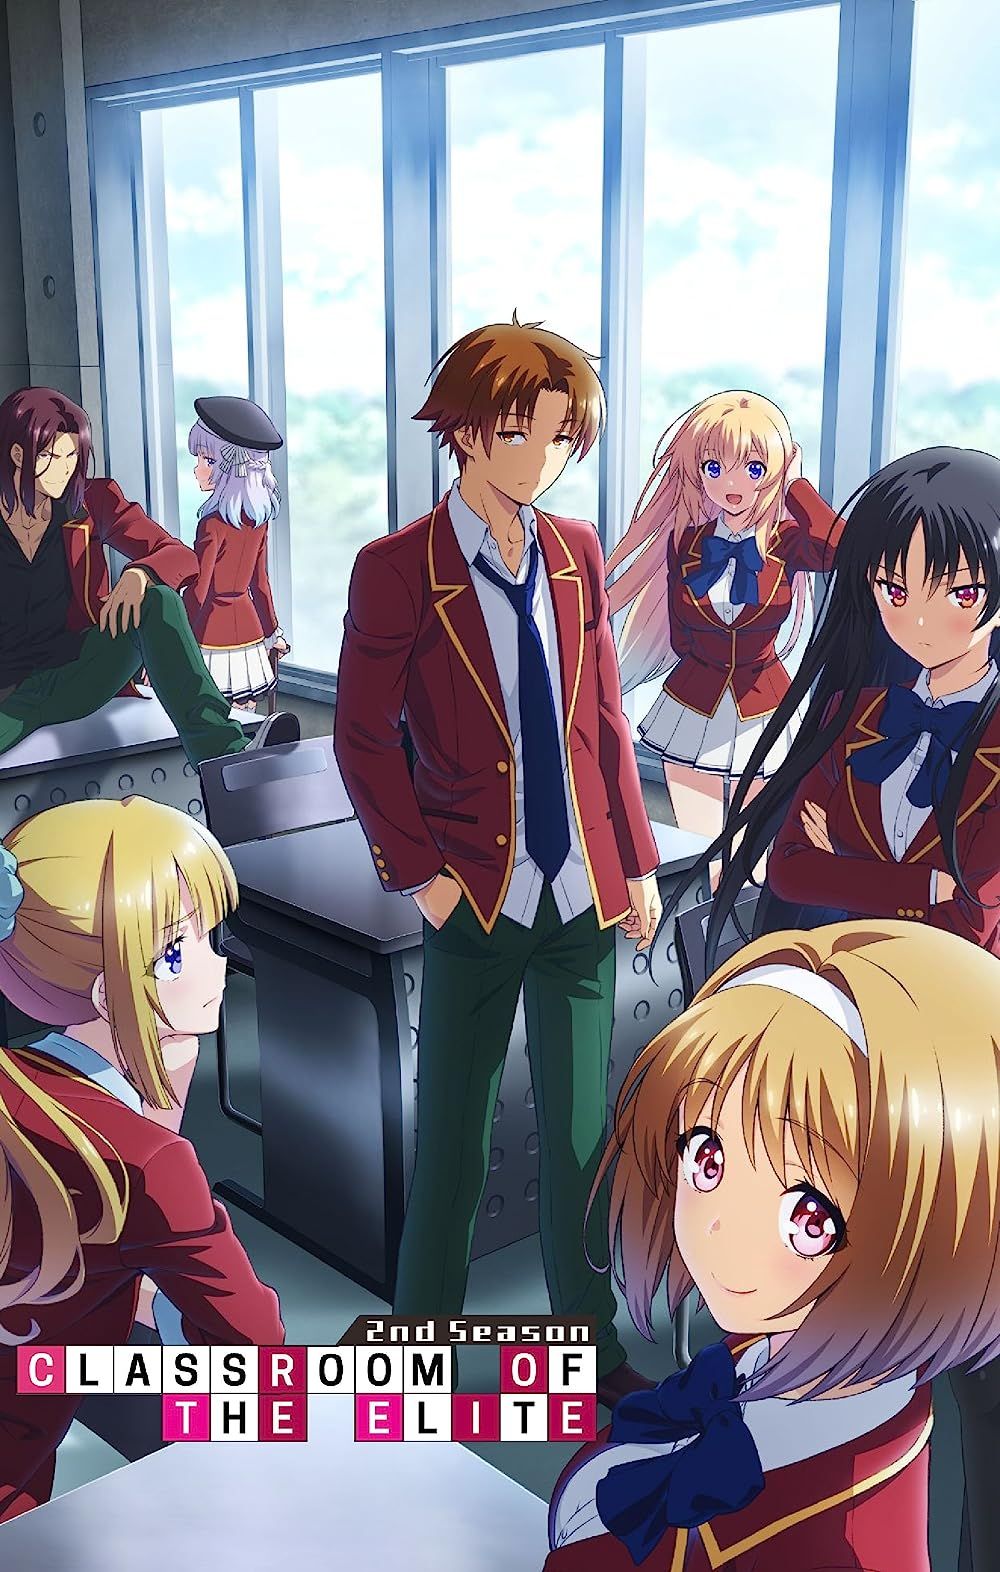 The students pose on poster for Classroom of the Elite